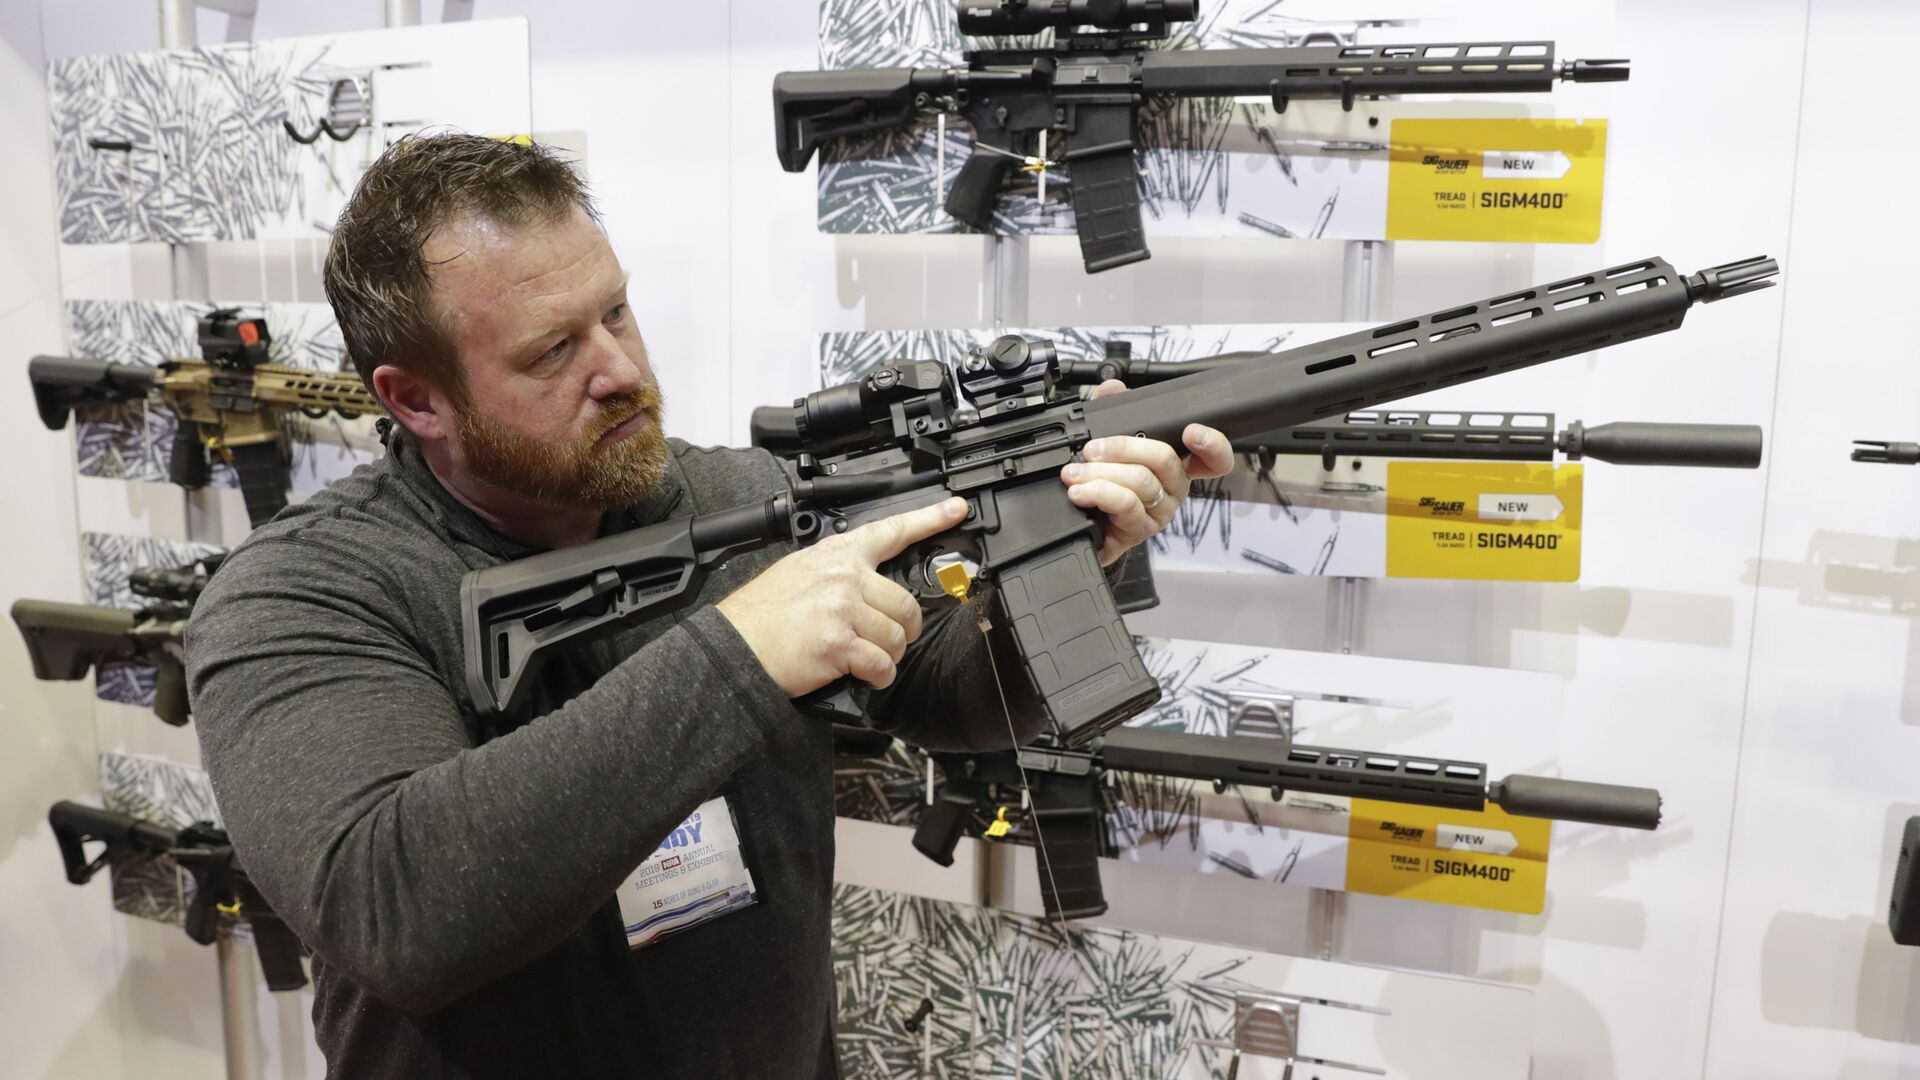 Bryan Oberc, Munster, Ind., tries out an AR-15 from Sig Sauer in the exhibition hall at the National Rifle Association Annual Meeting in Indianapolis, Saturday, April 27, 2019 - Sputnik International, 1920, 16.07.2021